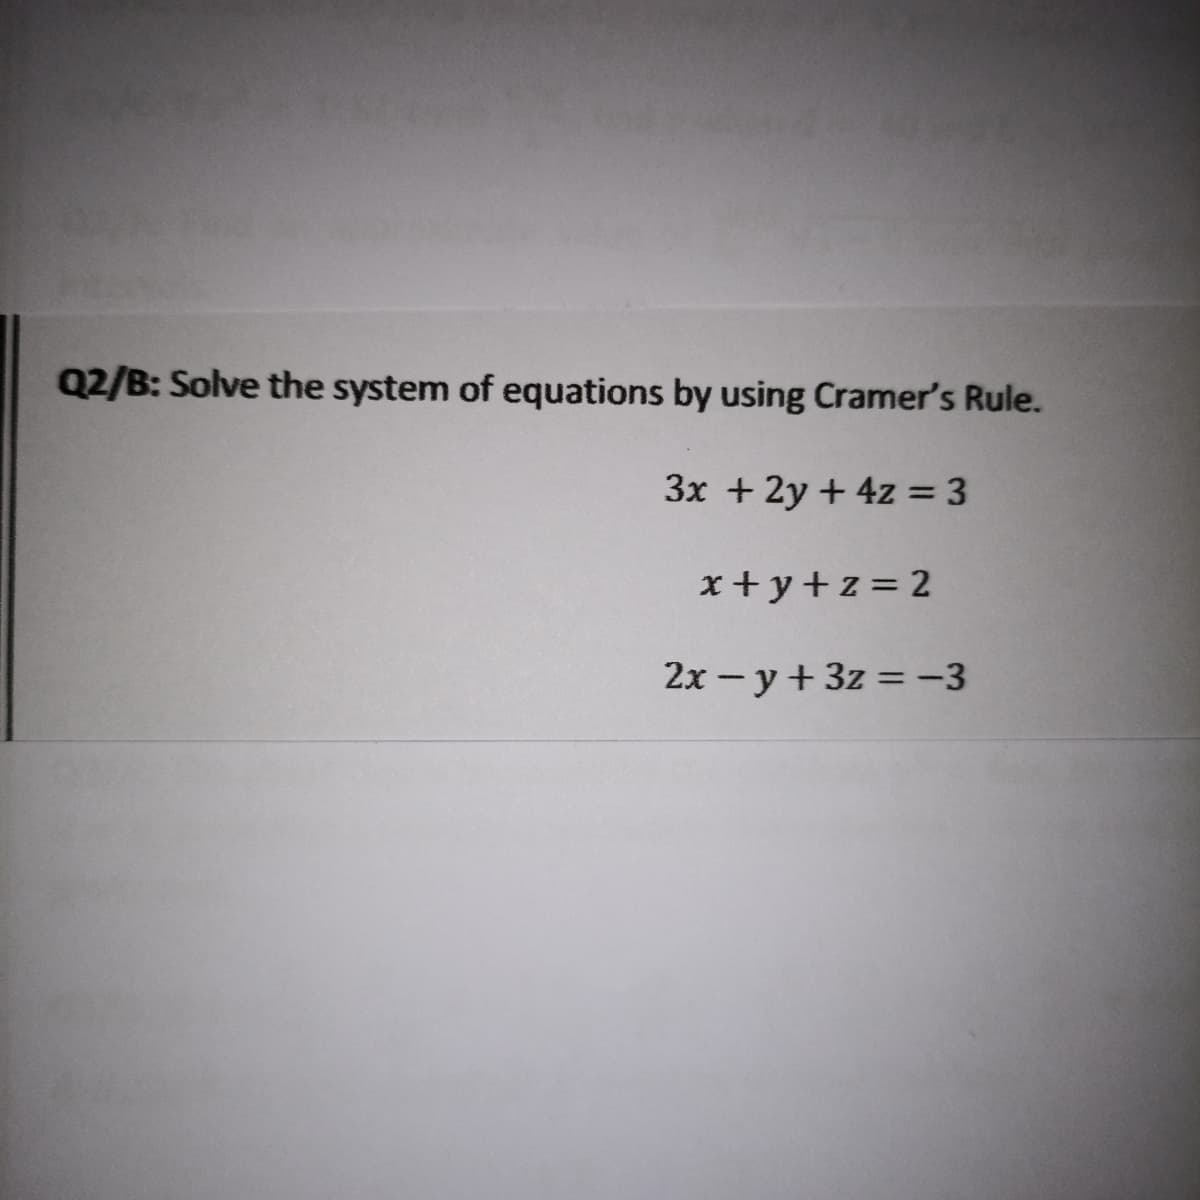 Q2/B: Solve the system of equations by using Cramer's Rule.
3x + 2y + 4z = 3
x+y+z = 2
2x - y+ 3z = -3
